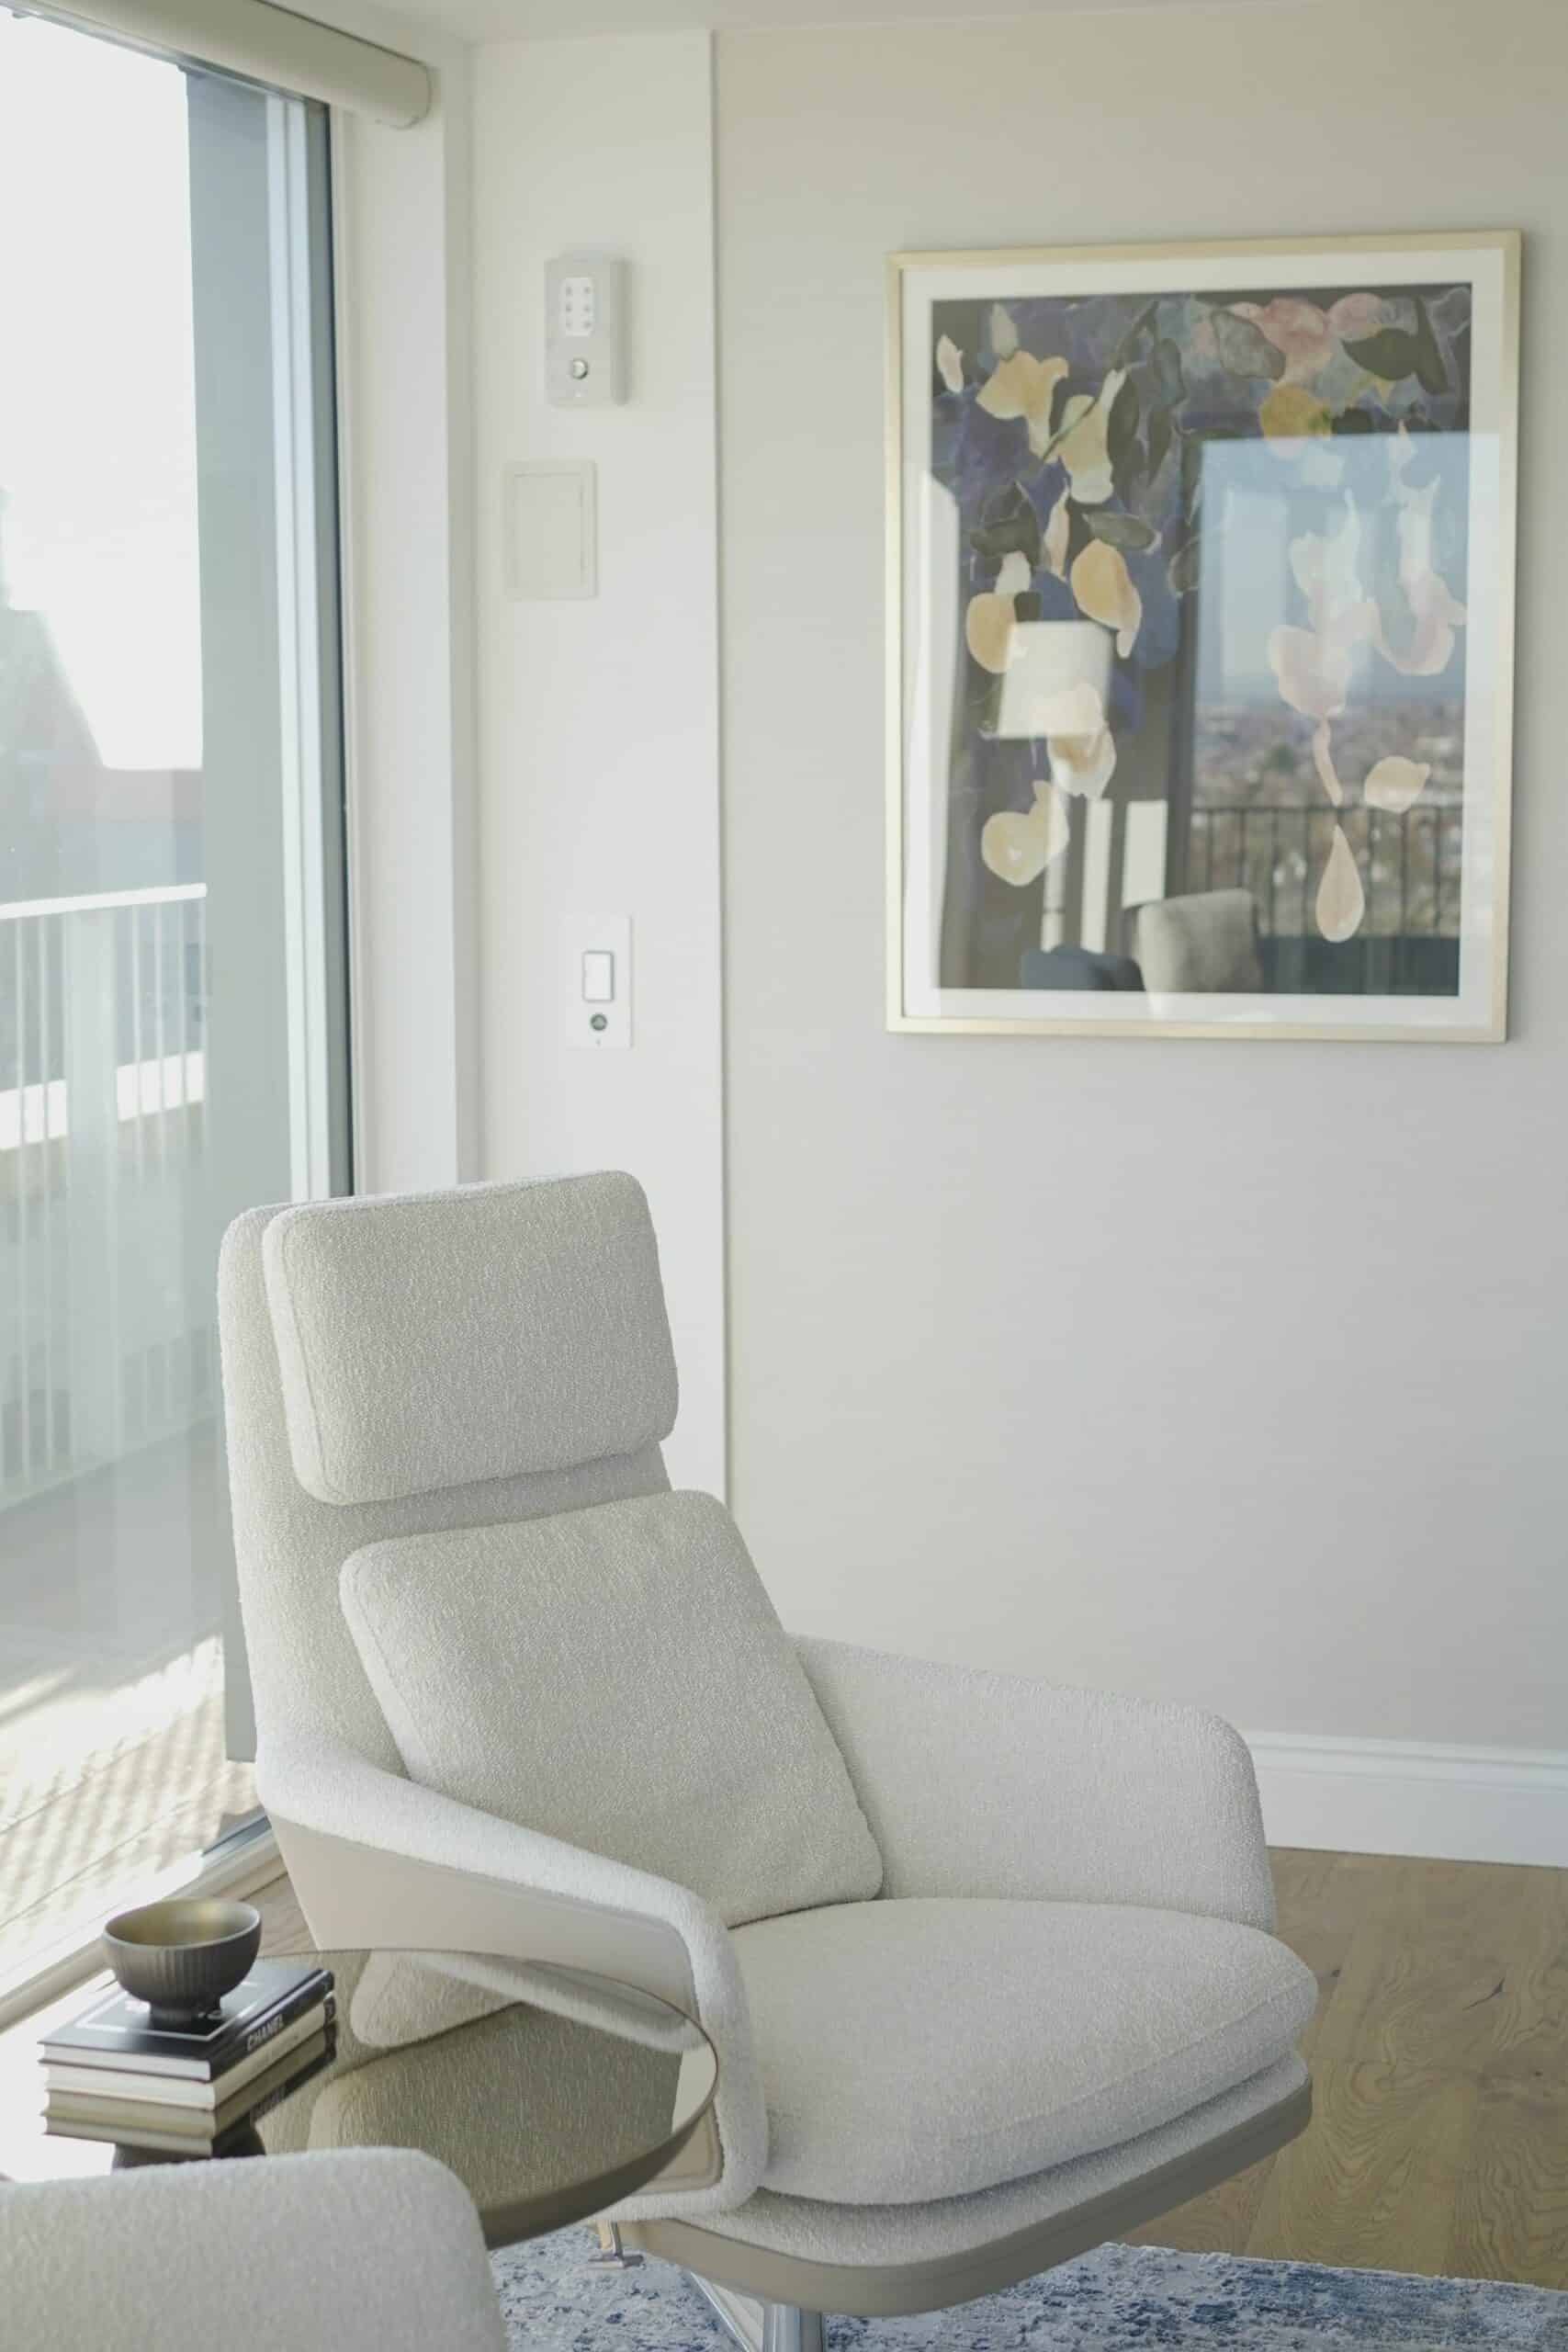 Luxury cream-coloured chair and side table in top floor apartment with modern art painting on the wall